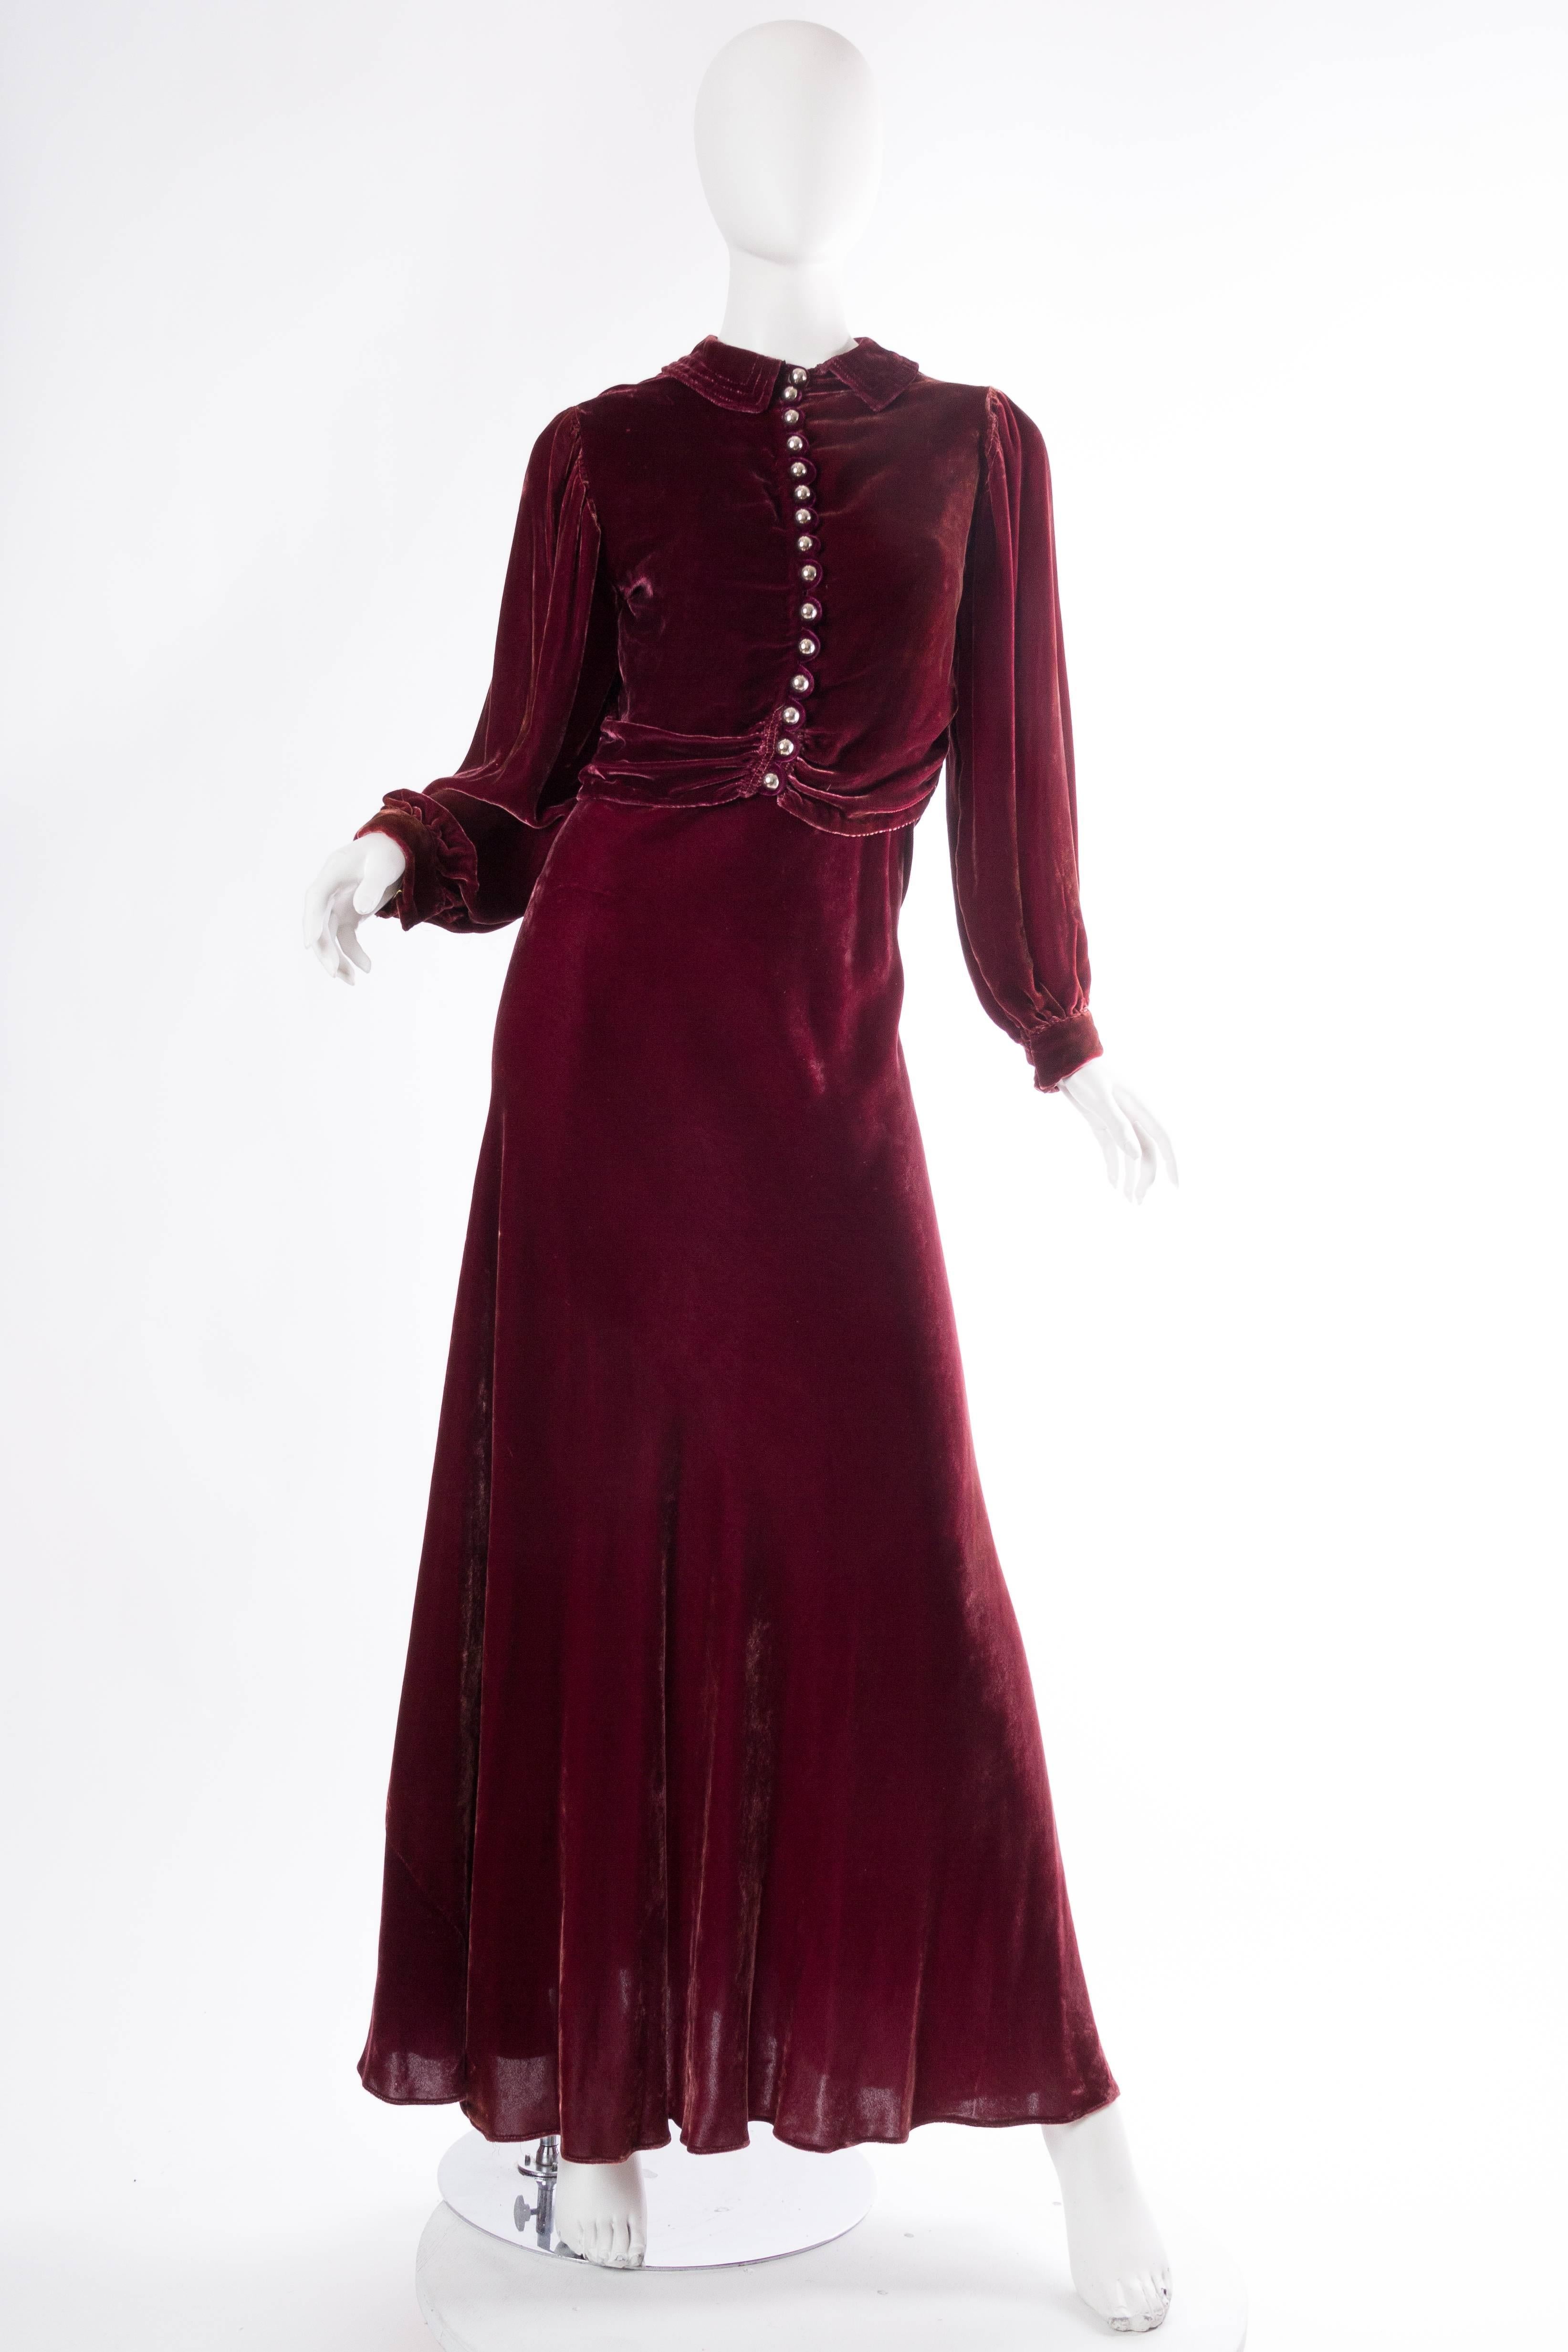 Black Backless Silk Velvet Gown from the 1930s with Matching Jacket